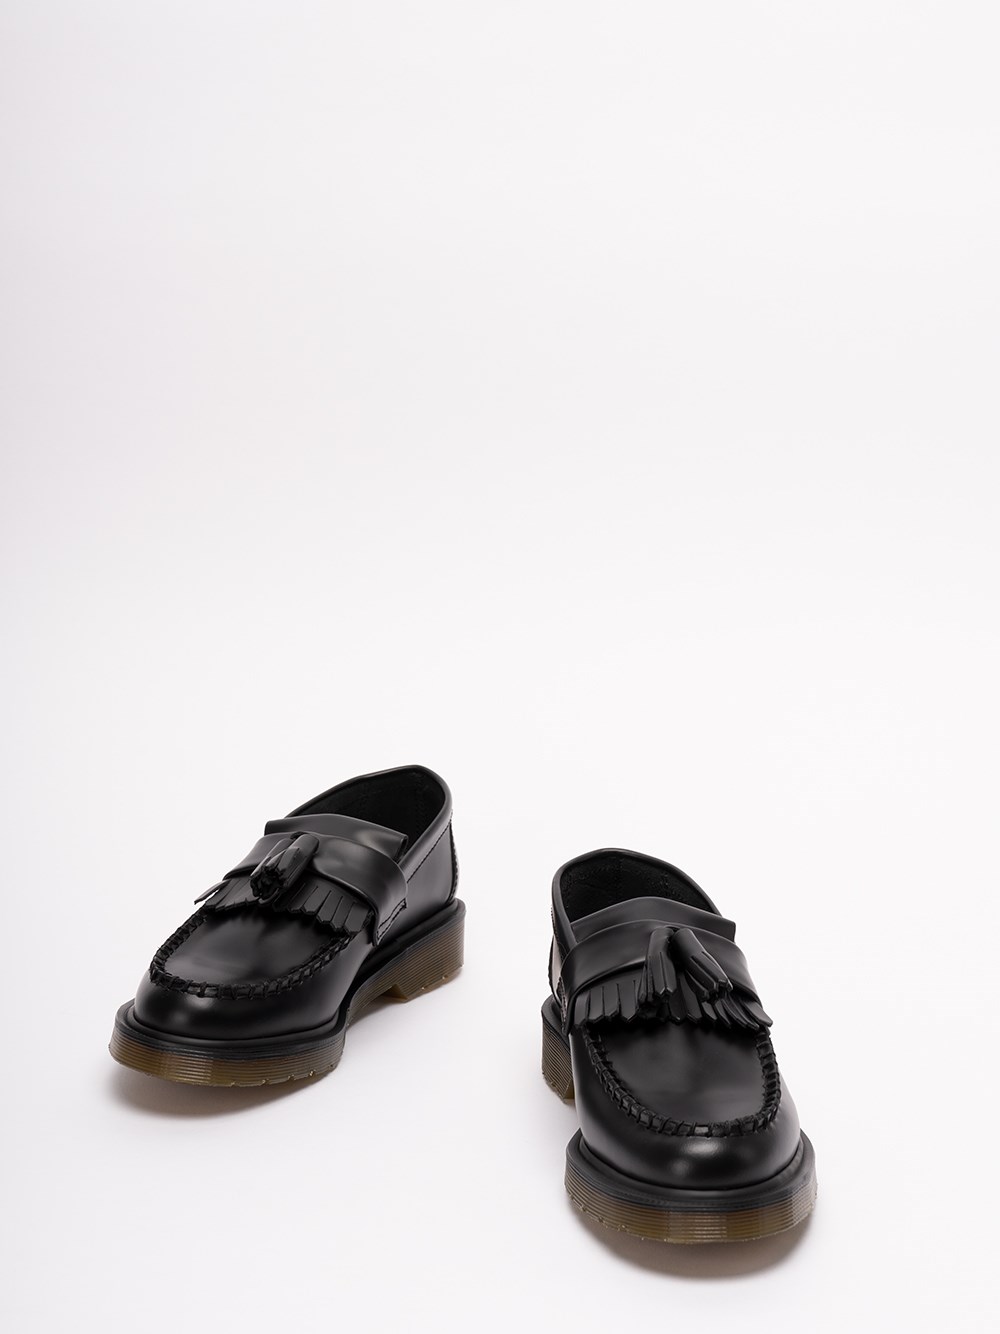 dr martens `adrian` leather tassel loafers available on Spinnaker